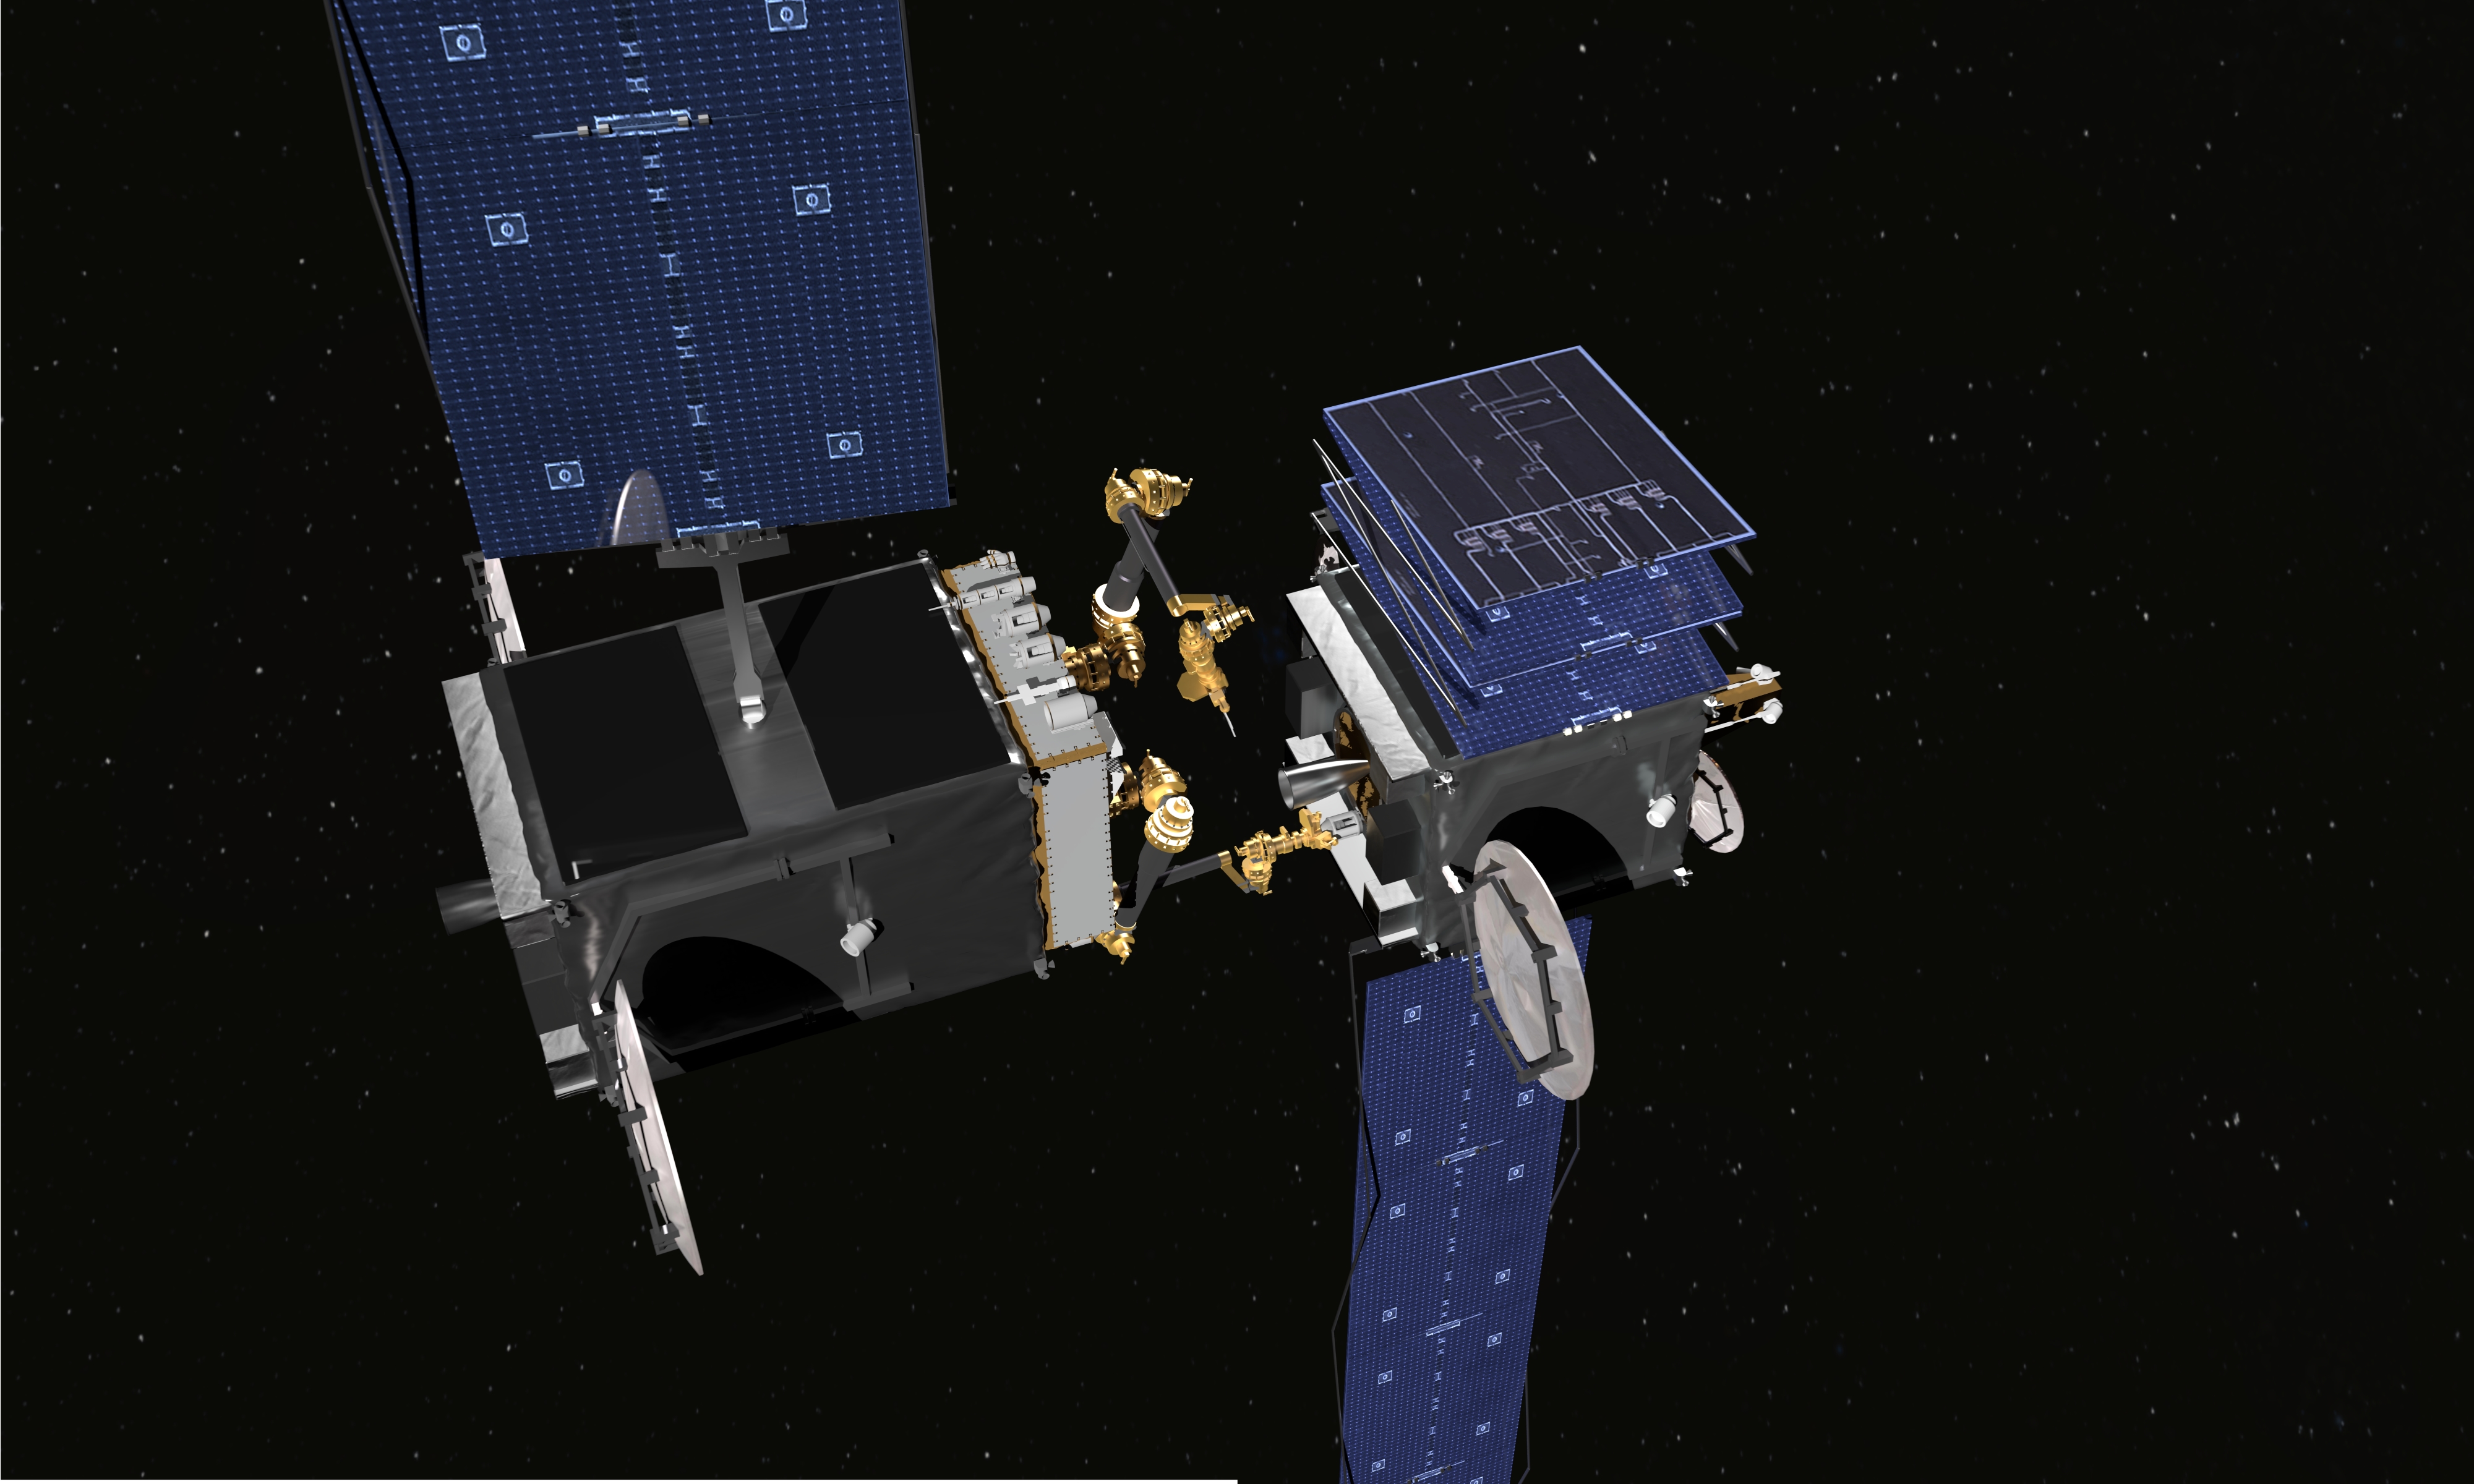 DARPA RSGS Robotic Servicing Vehicle utilizing MDA US Systems robotic arms to repair a satellite on orbit. Source: DARPA